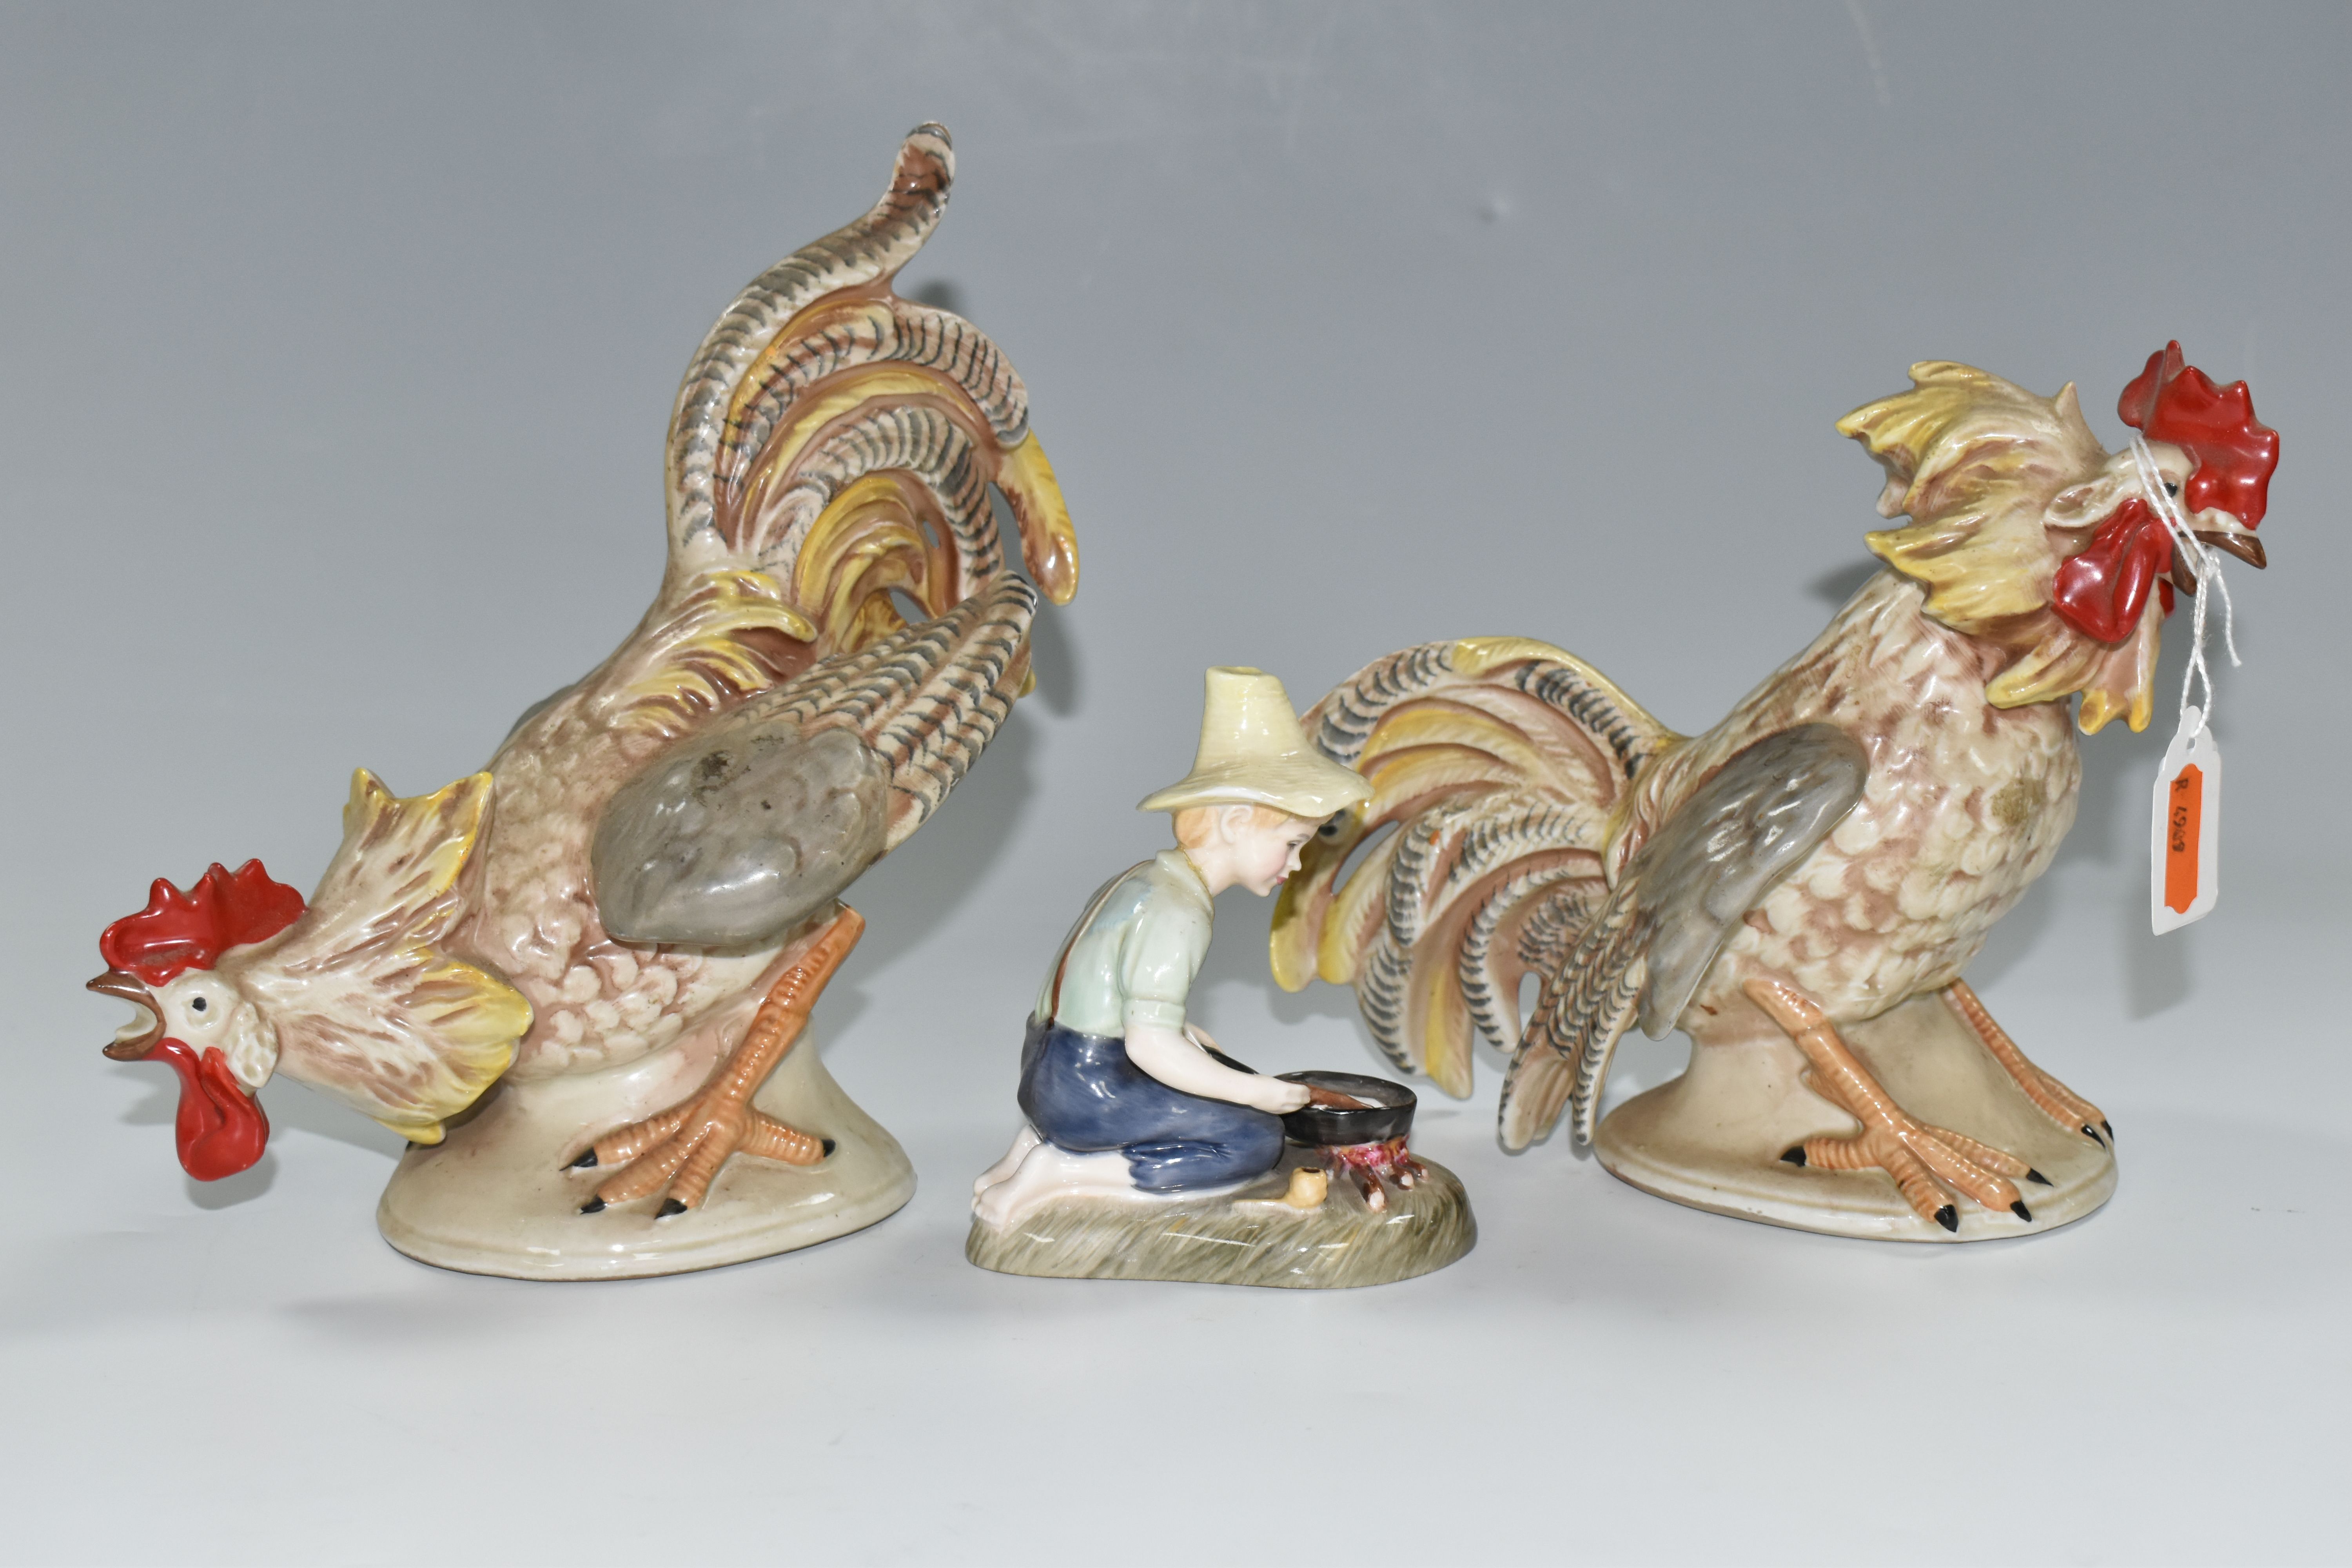 TWO 20TH CENTURY CONTINENTAL PORCELAIN FIGURES OF COCKERELS, posed as ready to fight each other, - Image 5 of 8